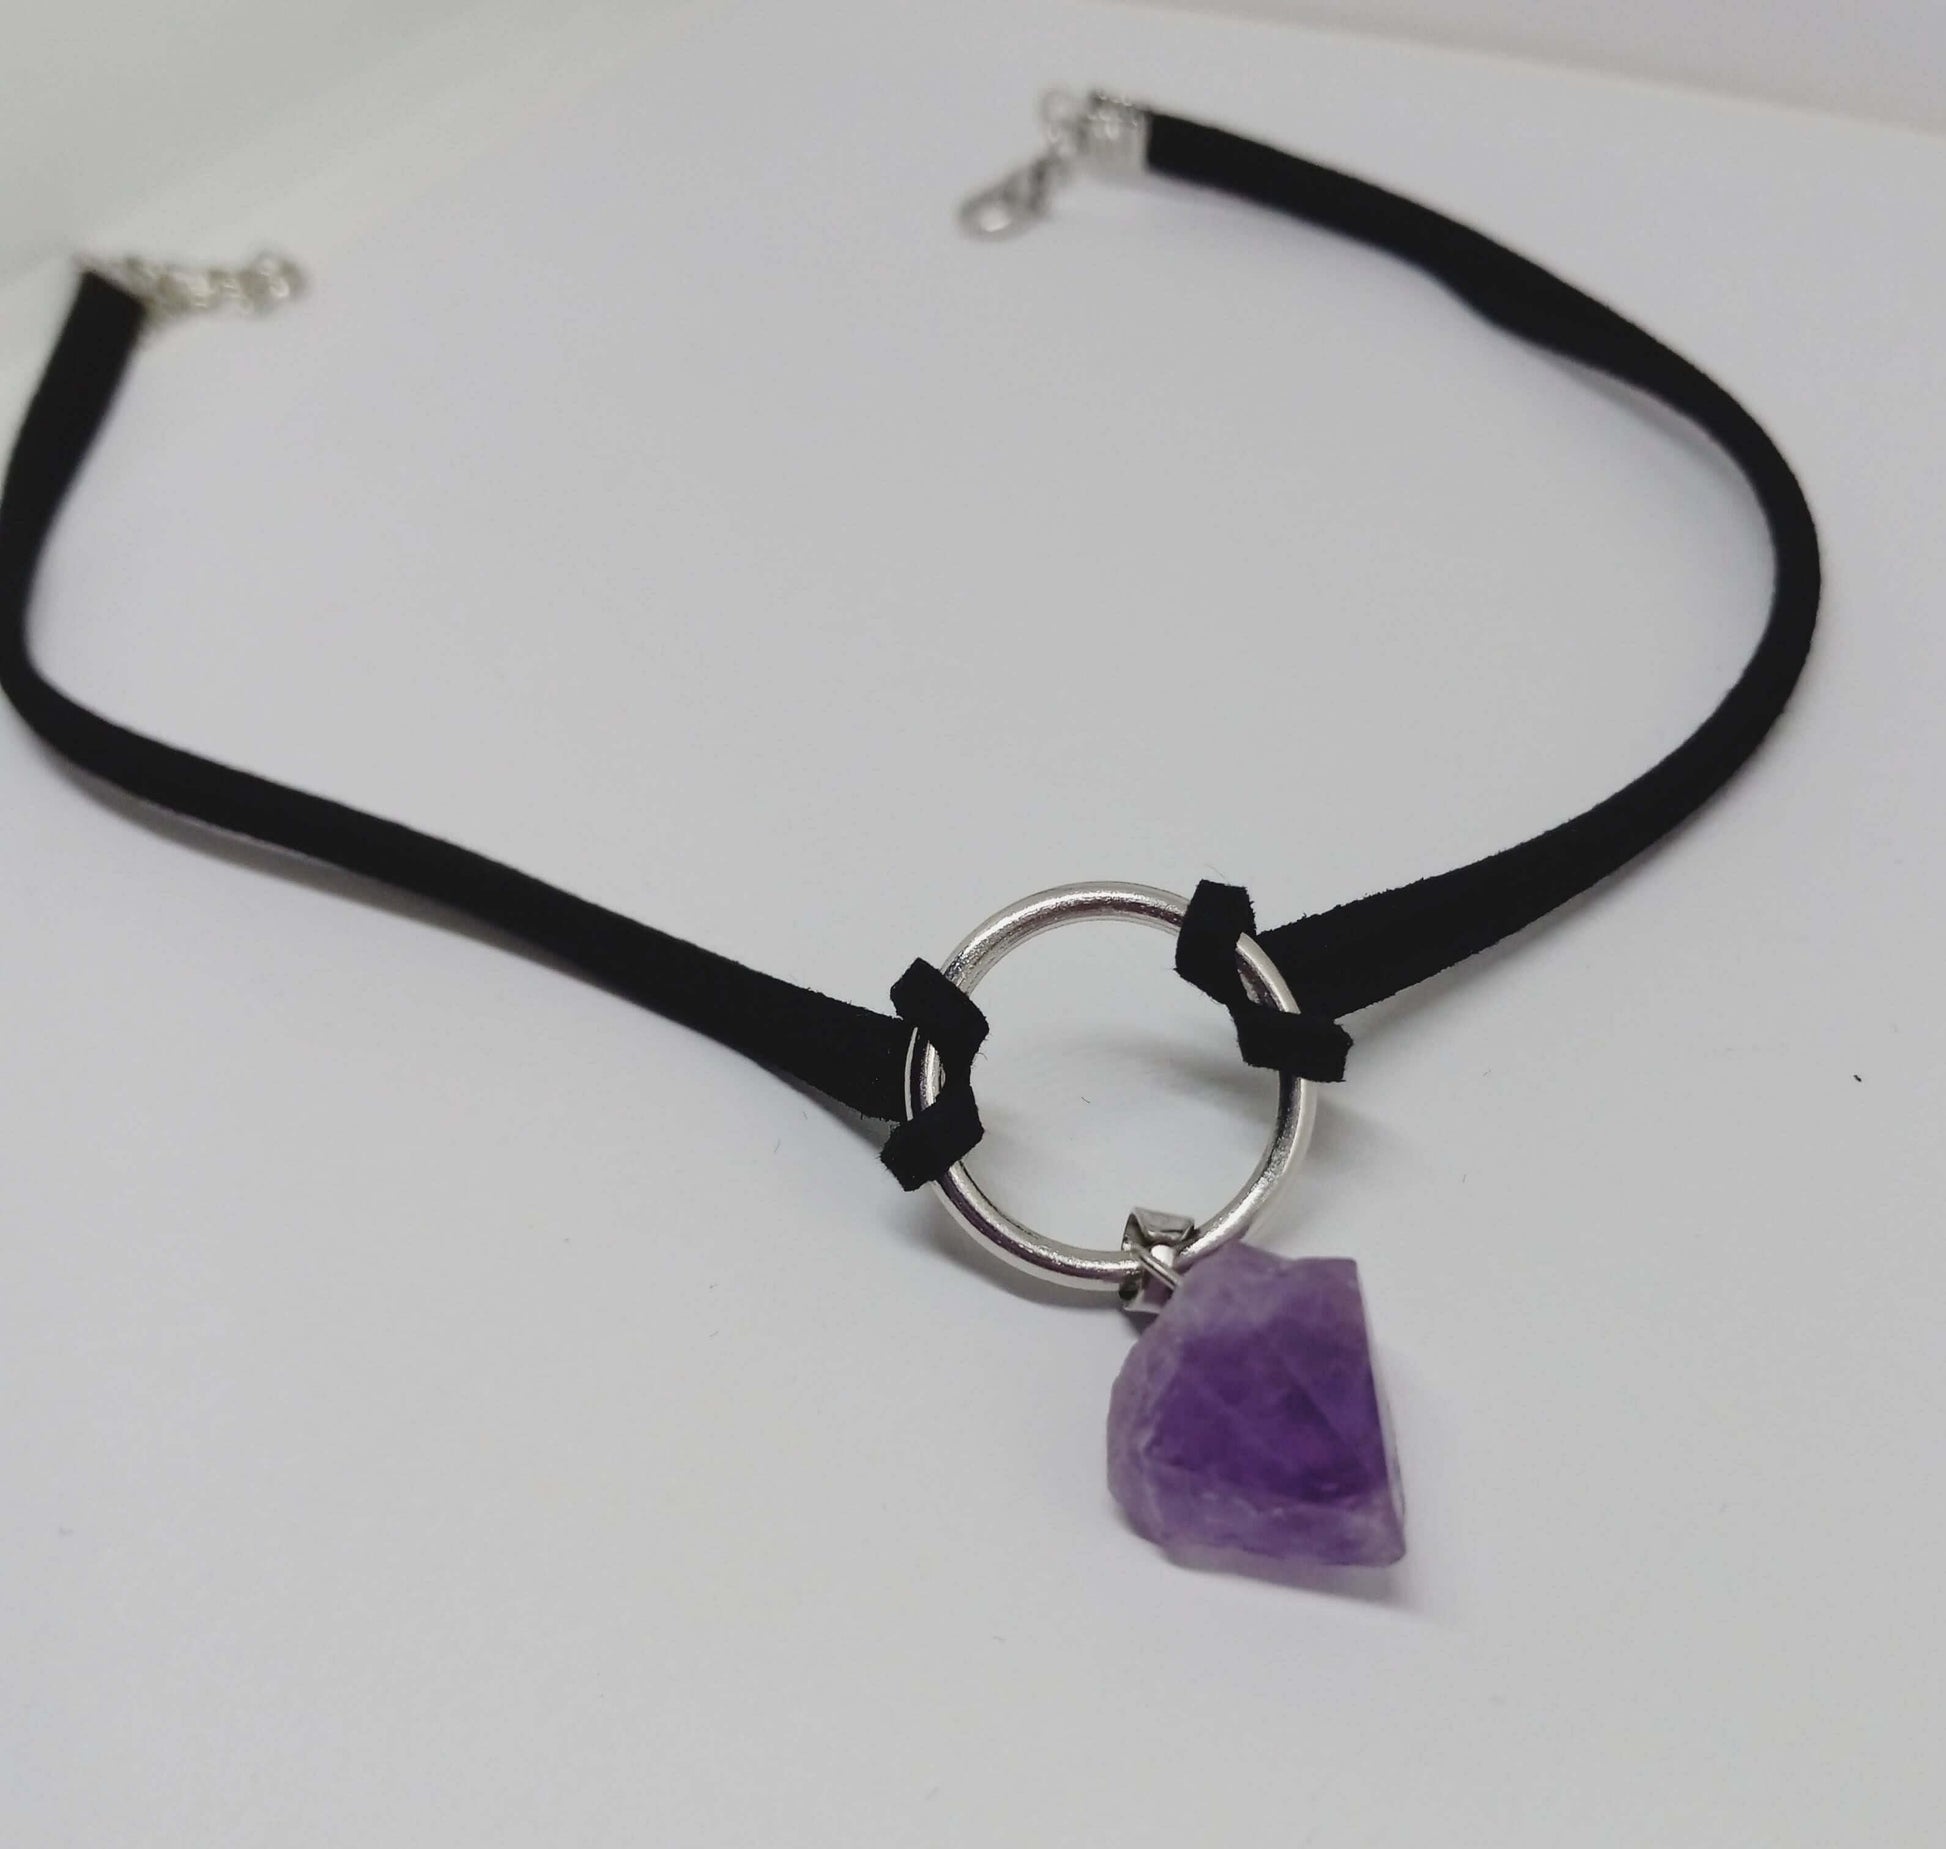 Raw Amethyst Natural Crystal Handmade Choker Necklace Suede Boho Style Black Leather - Guiding Lights Boutique